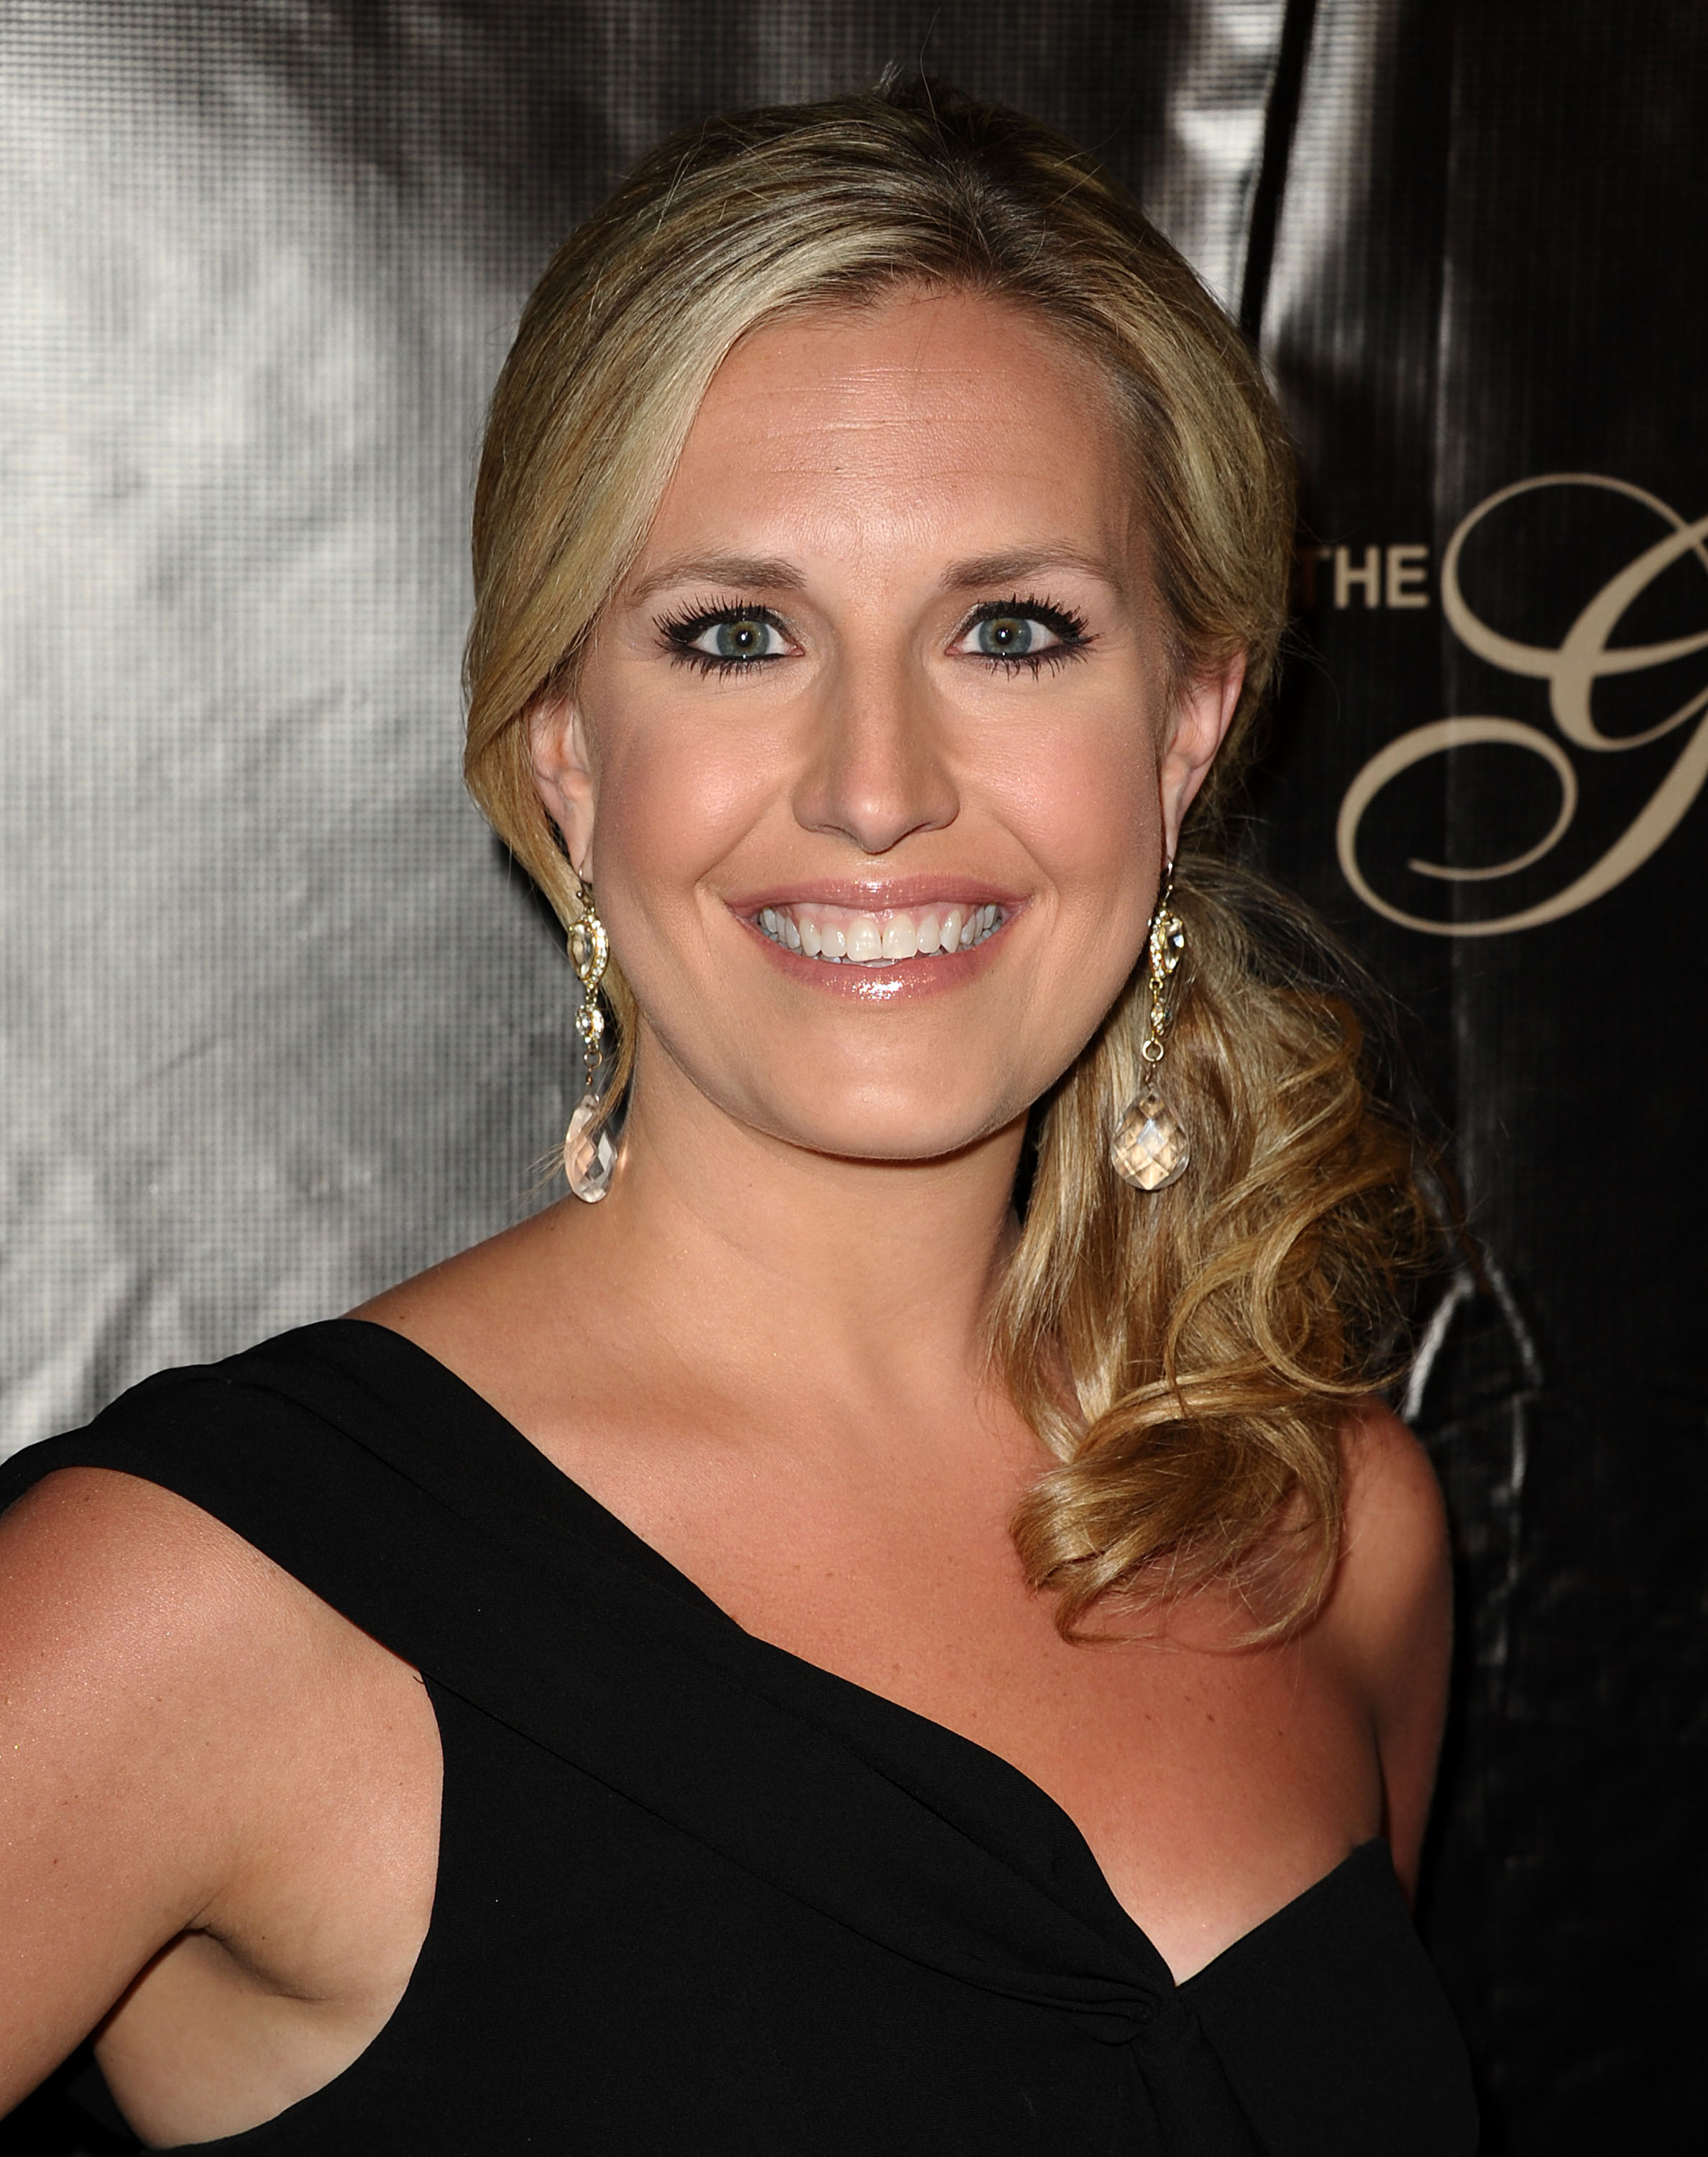 Pregnant Cnn Anchor Poppy Harlow Passes Out On Air